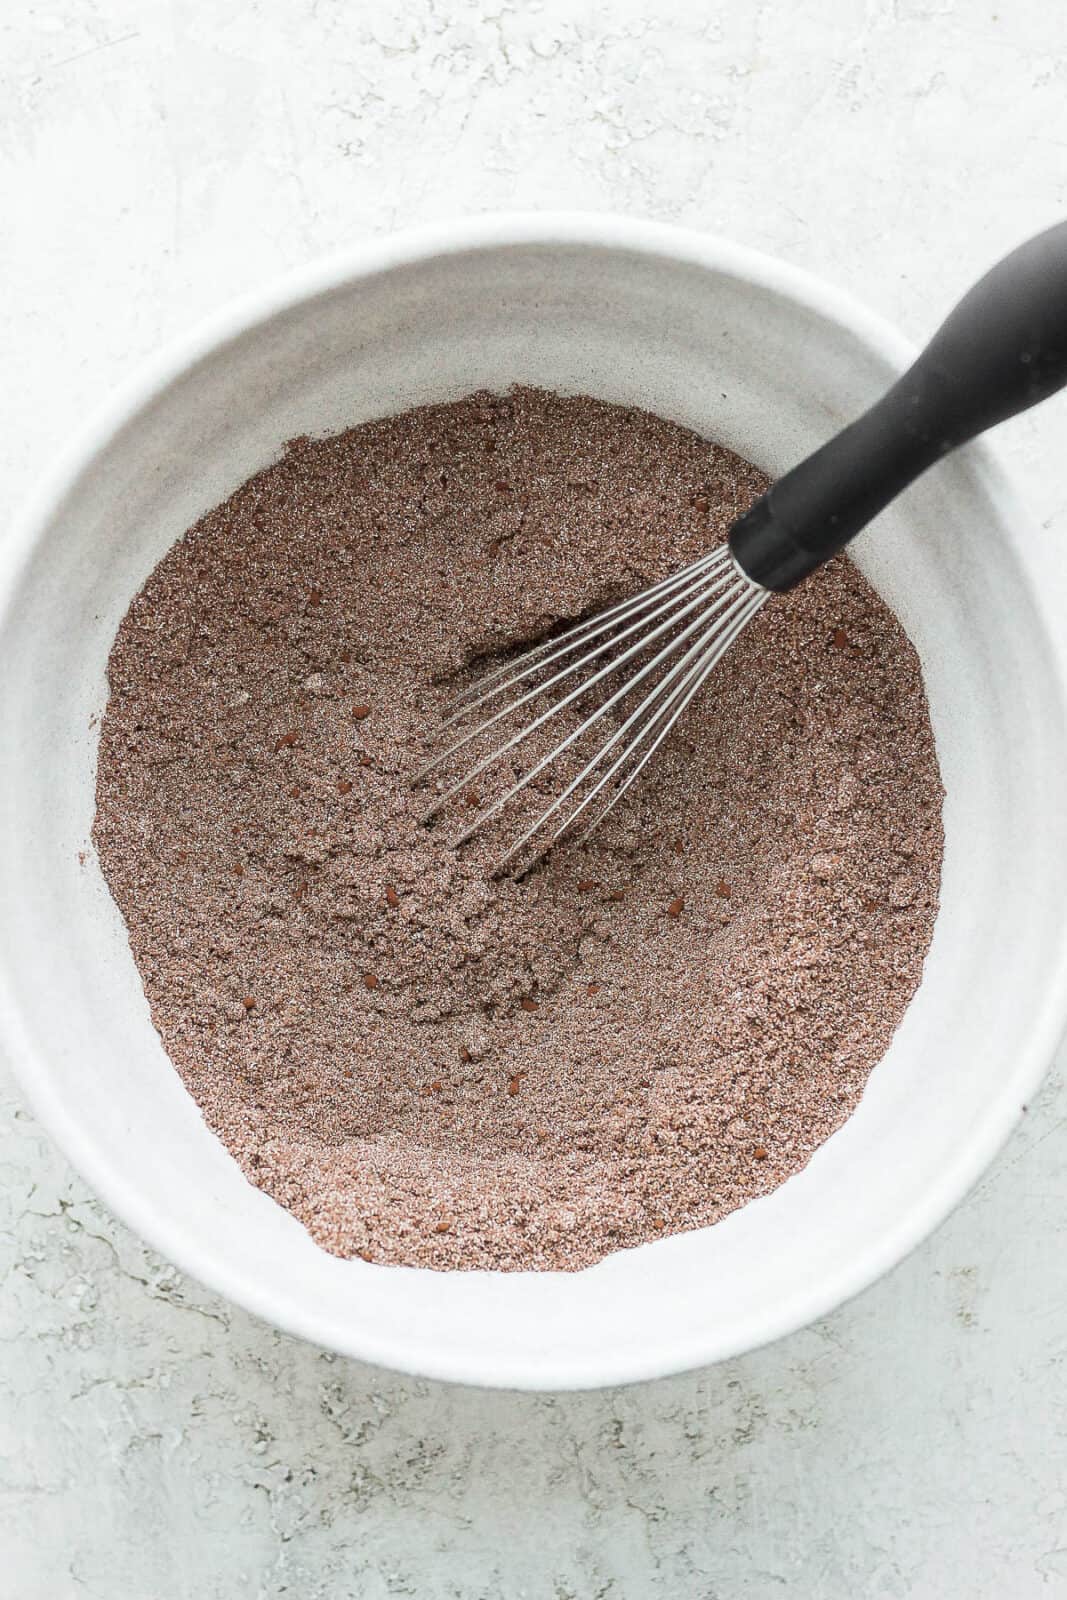 Almond flour, cocoa powder and coconut sugar in a bowl all mixed together.